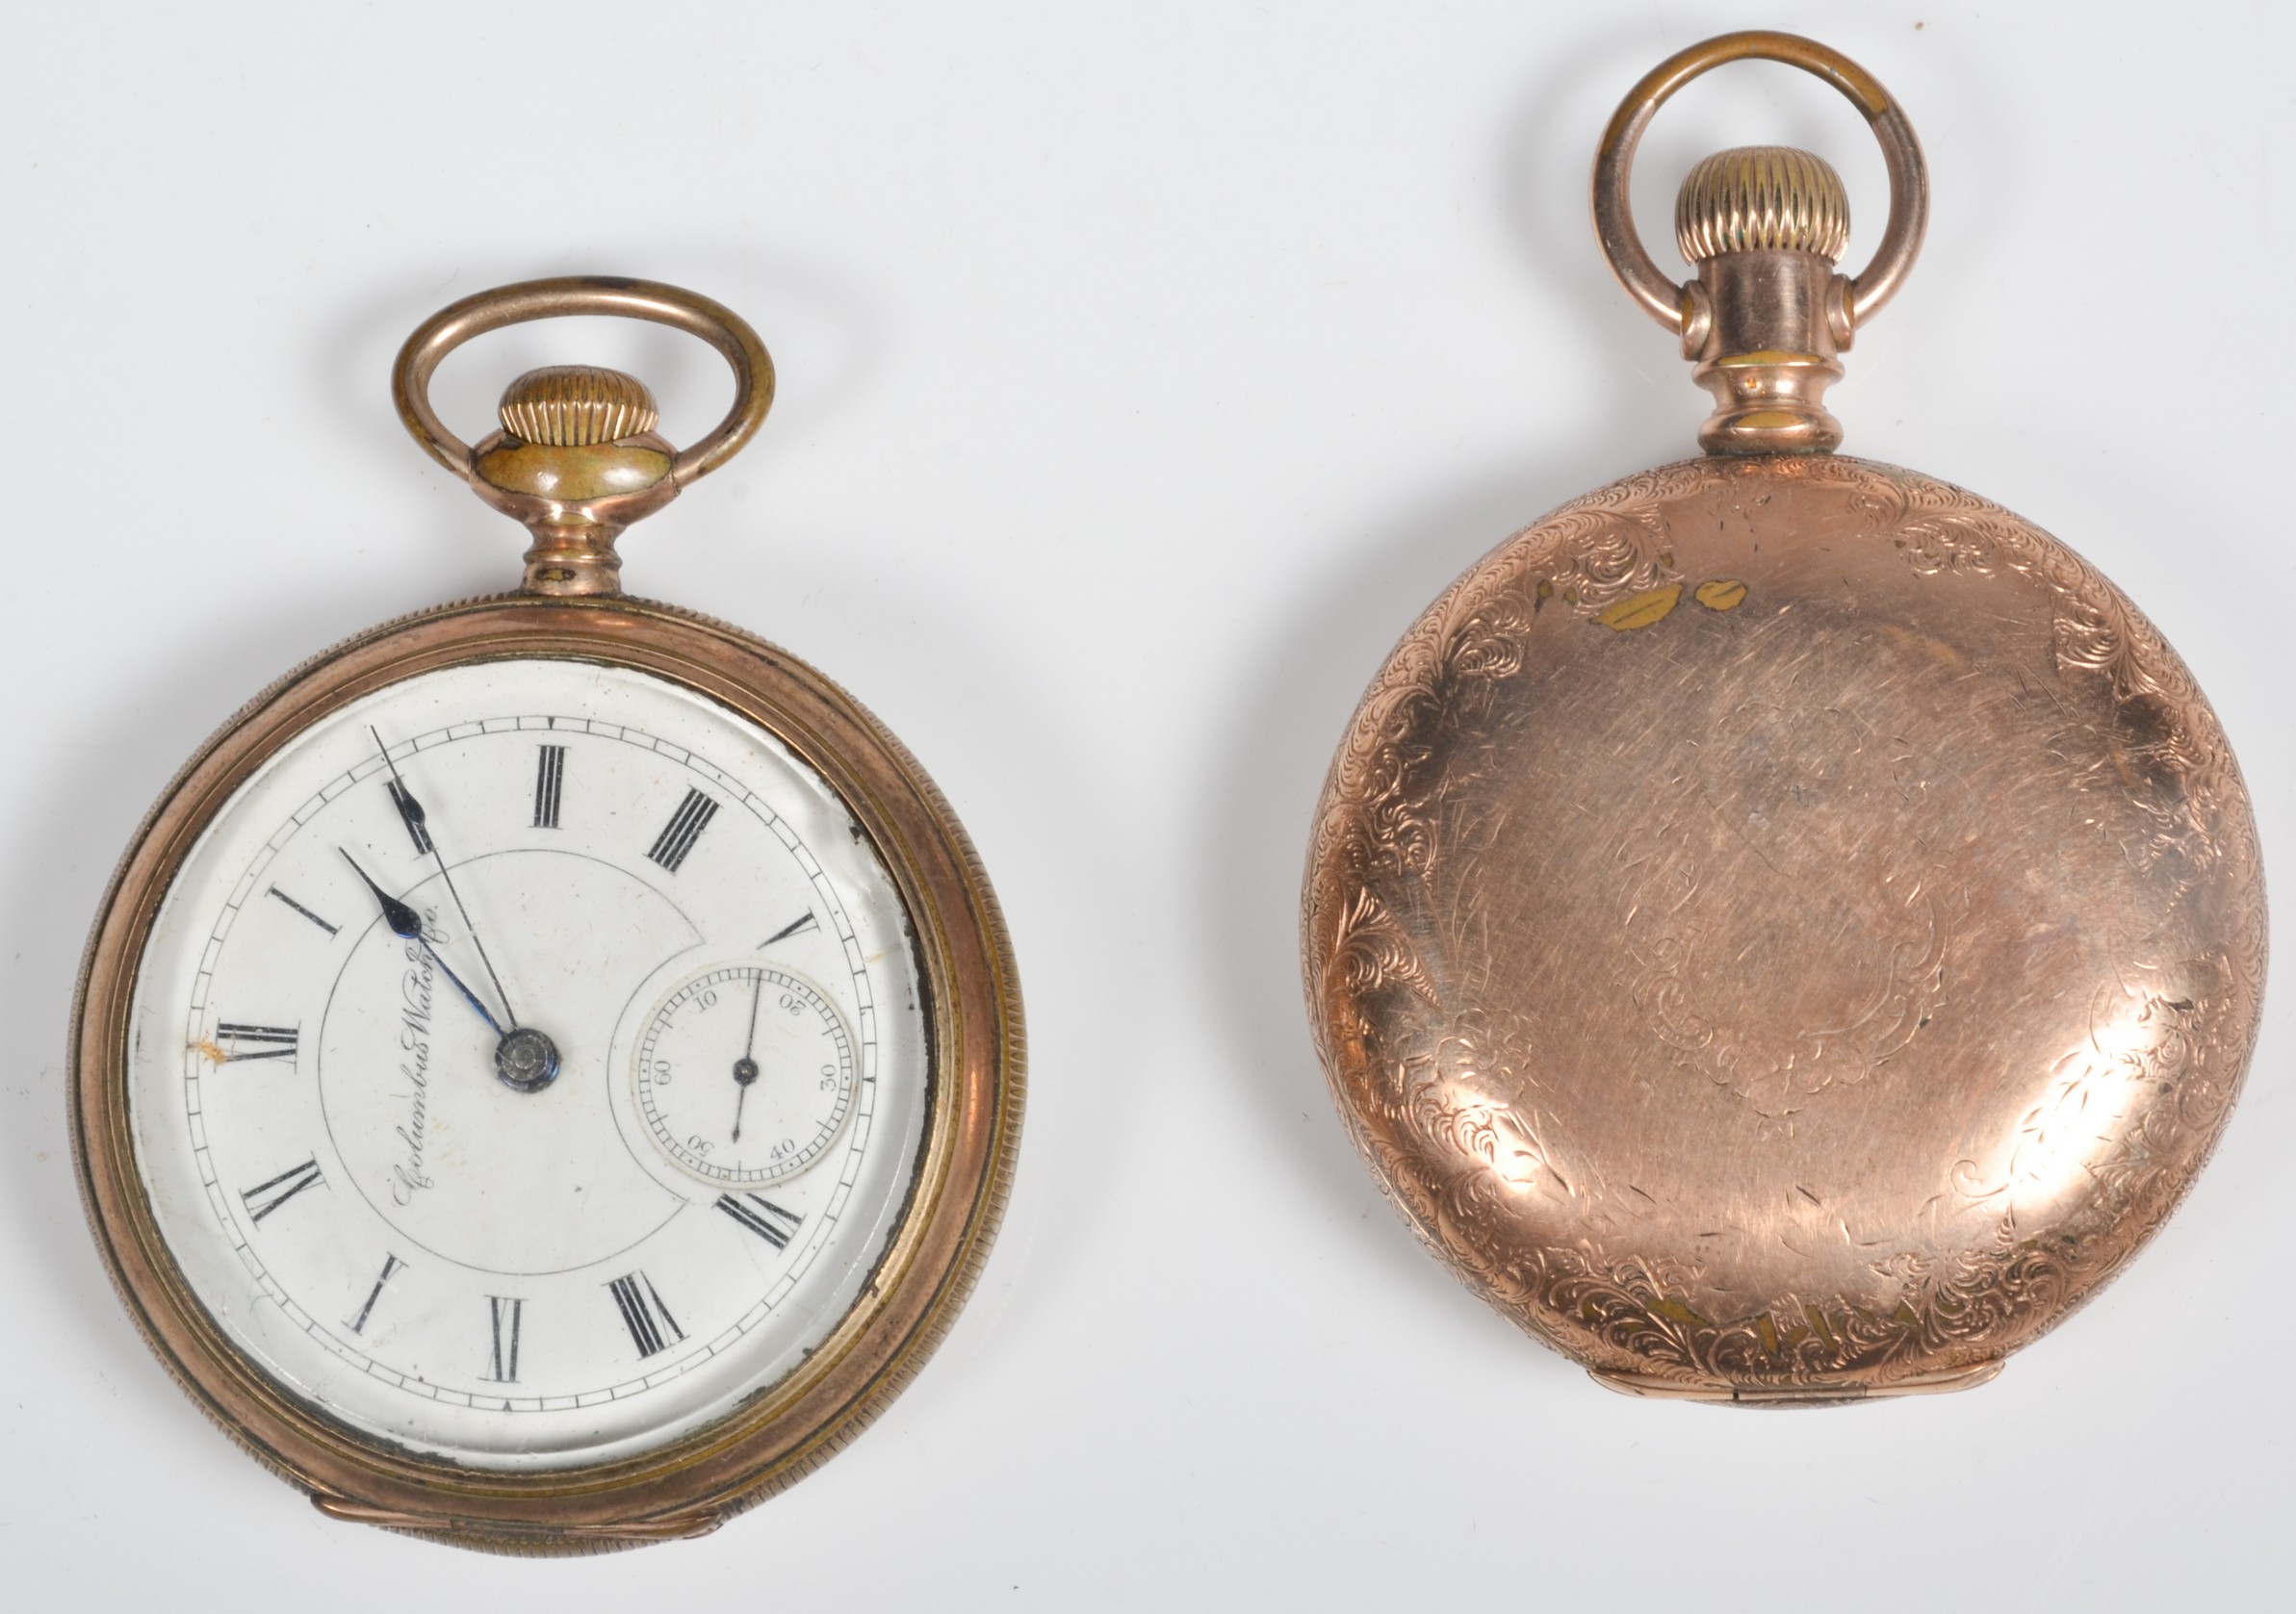  2 19th C GF pocket watches to 3b6948